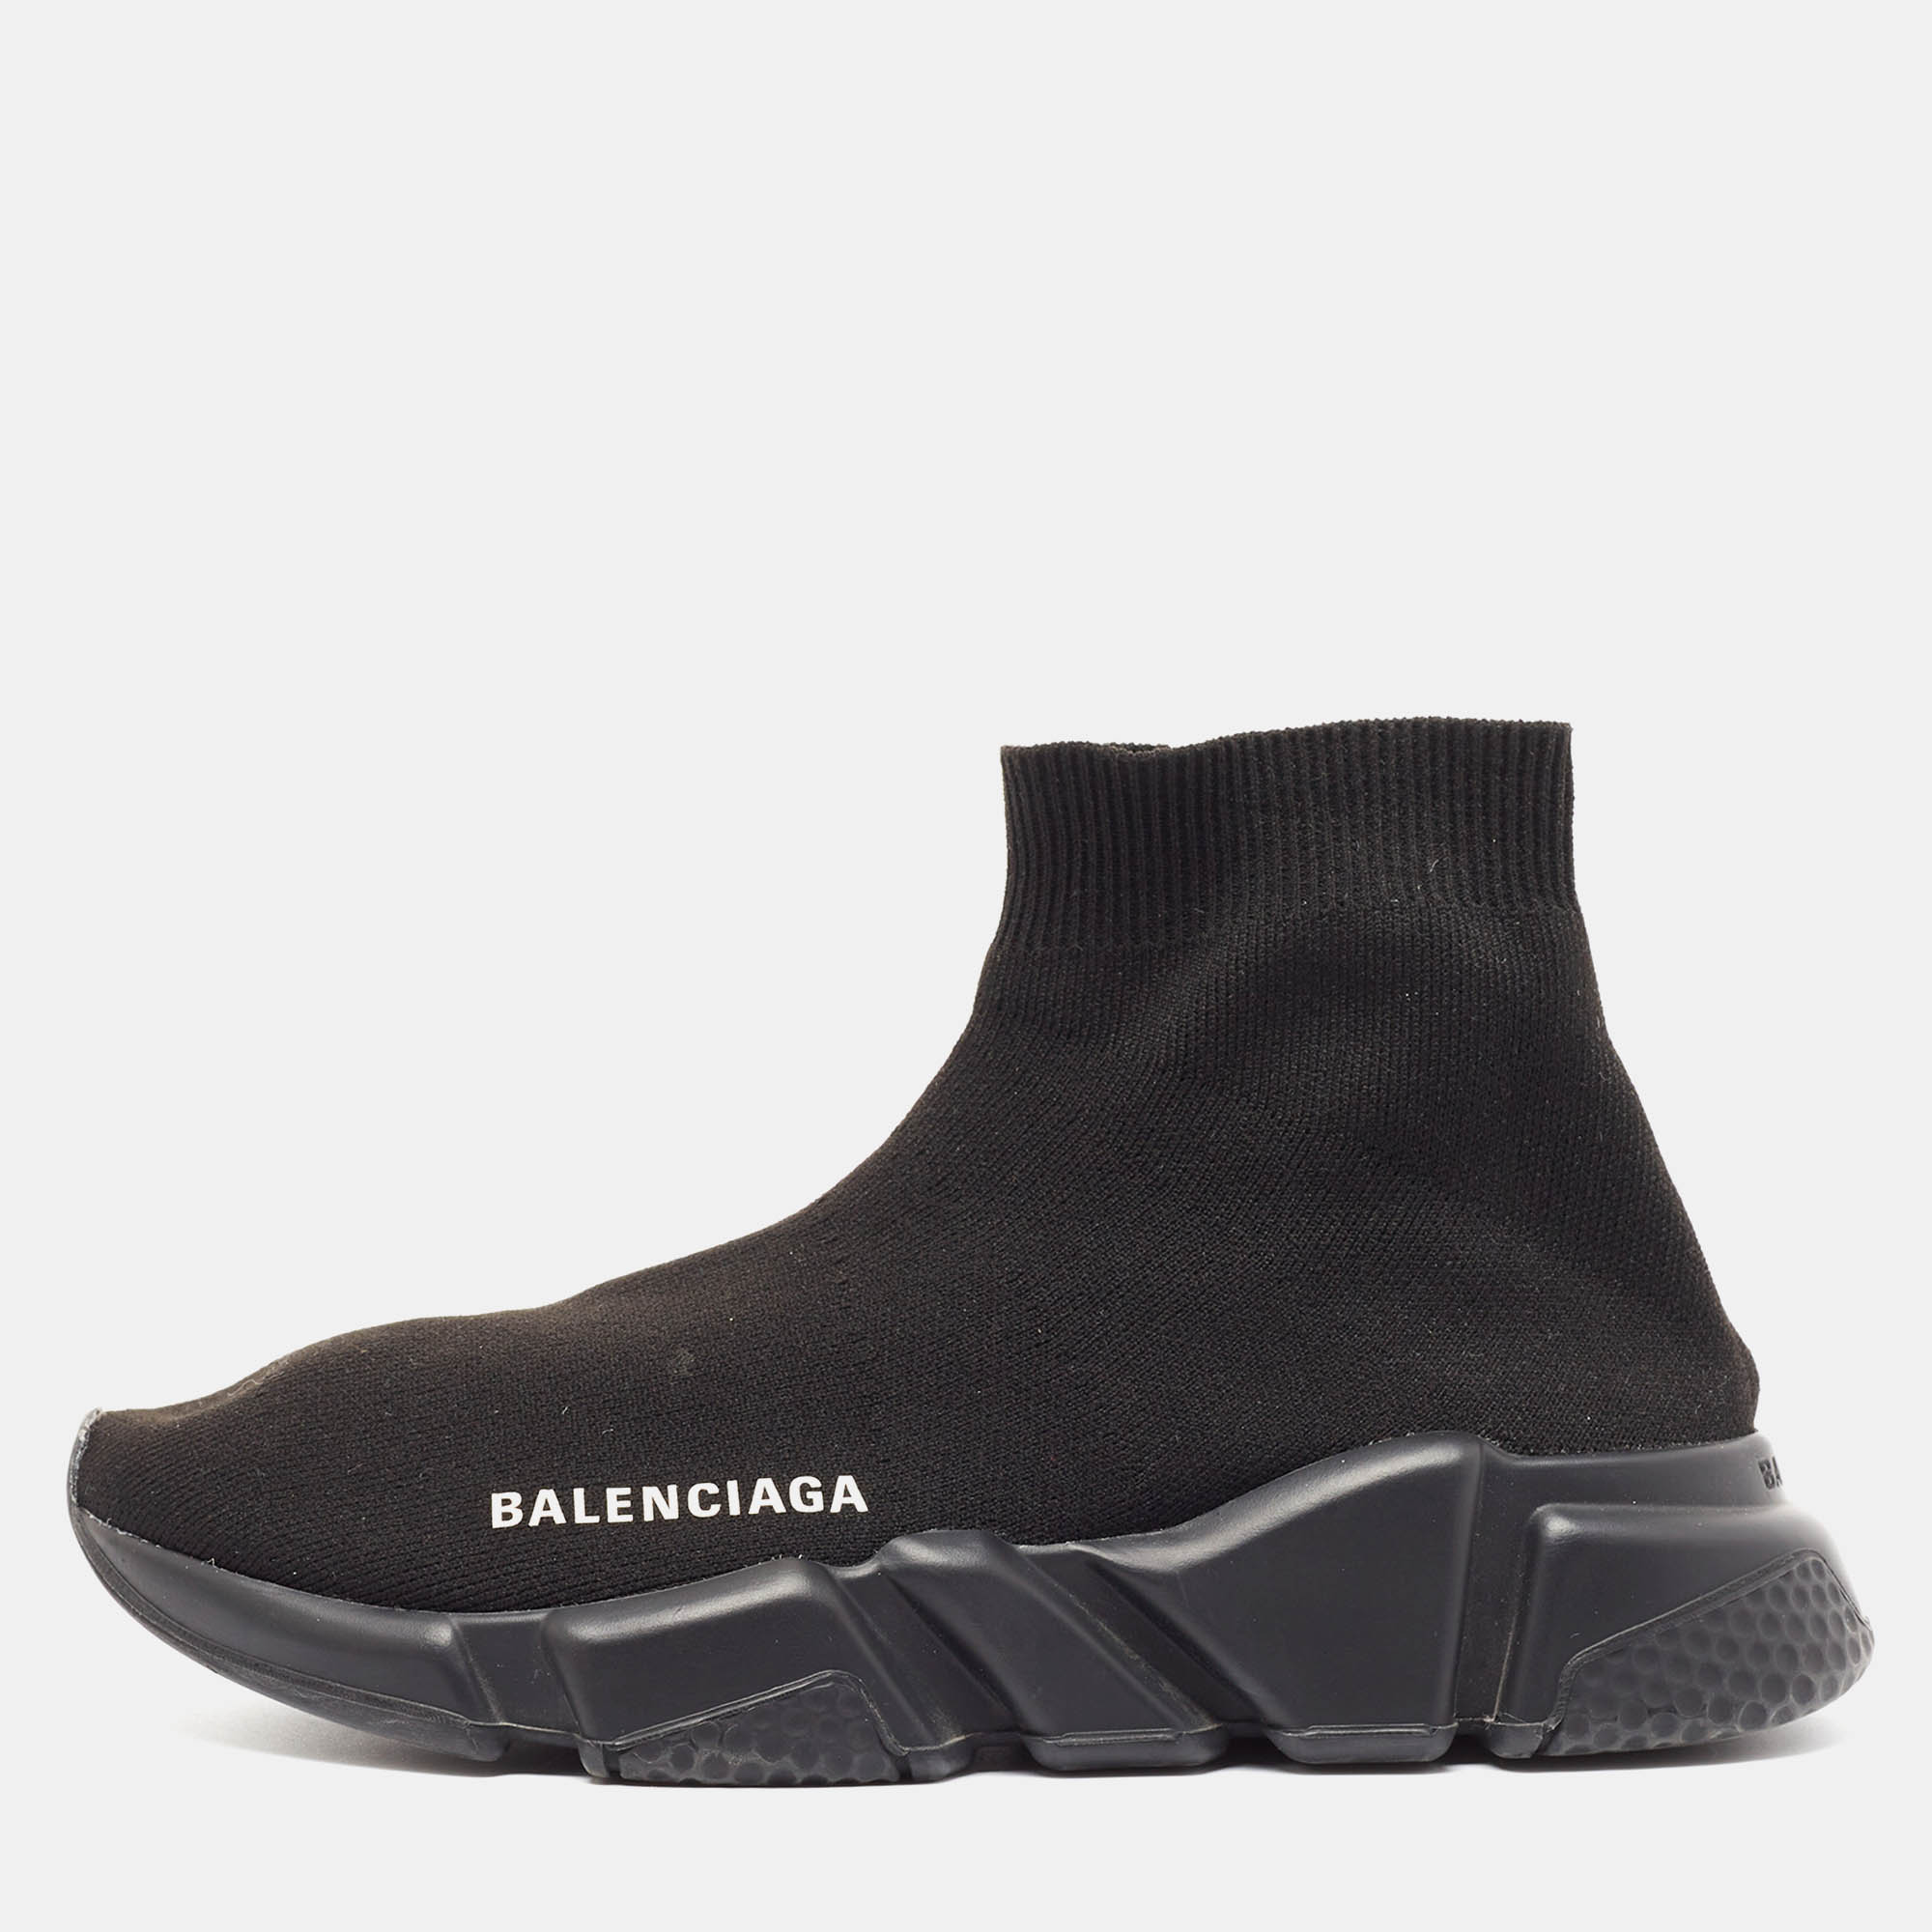 

Balenciaga Black Knit Speed Trainer Sneakers Size